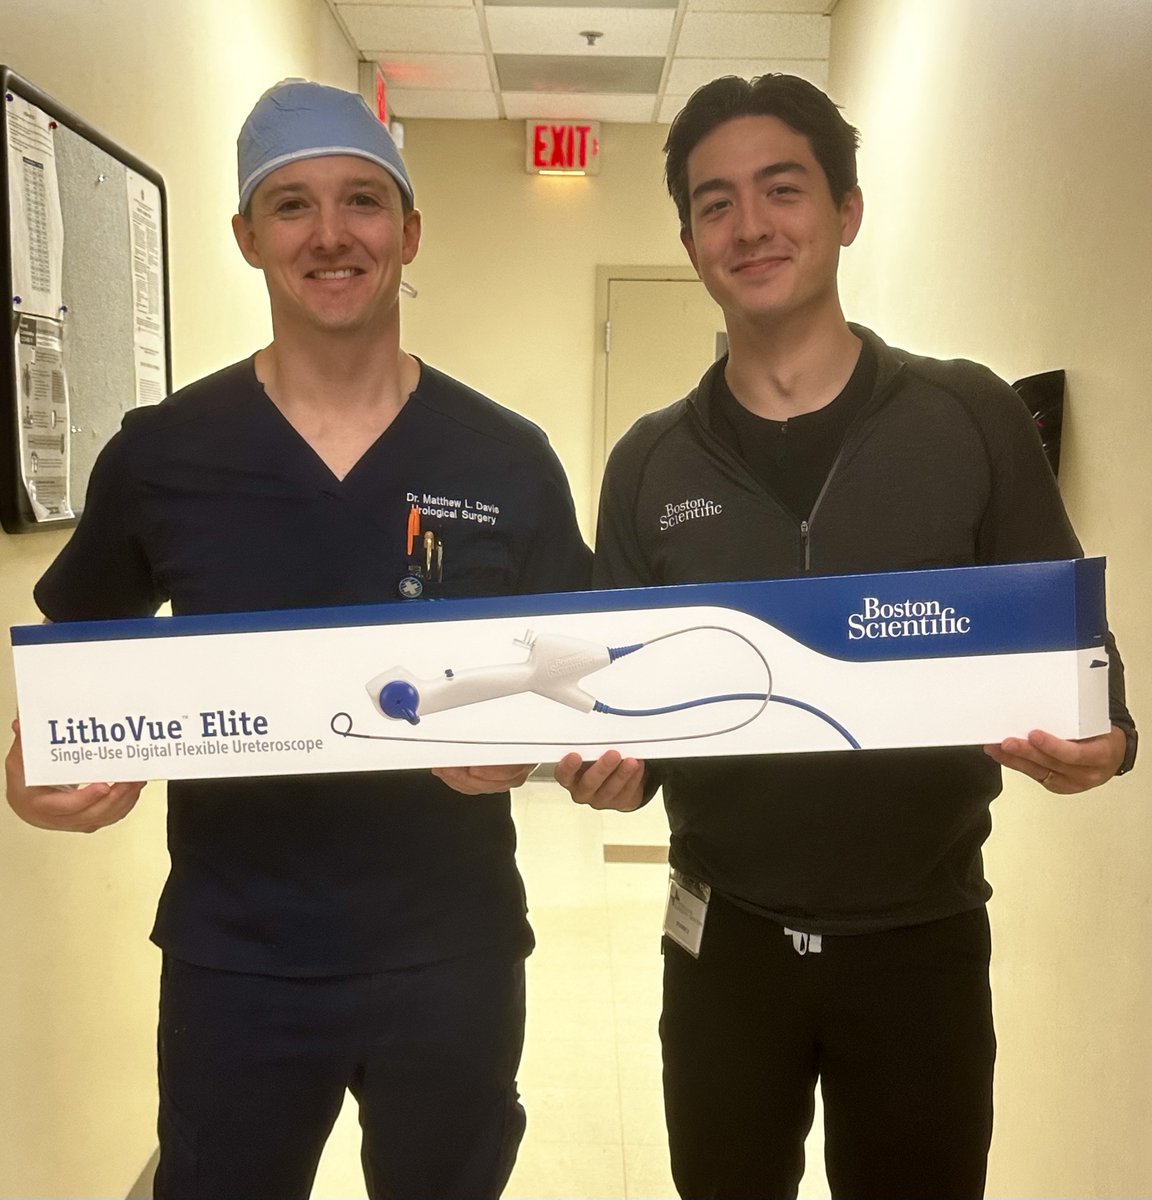 Dr. Matthew Davis at Physicians Surgery Center is the first to use LithoVue™ Elite in western Tennesee! LithoVue Elite displays accurate, real-time, intrarenal pressure monitoring directly on your current operating room monitor. Learn more: bit.ly/3o7h2Bd